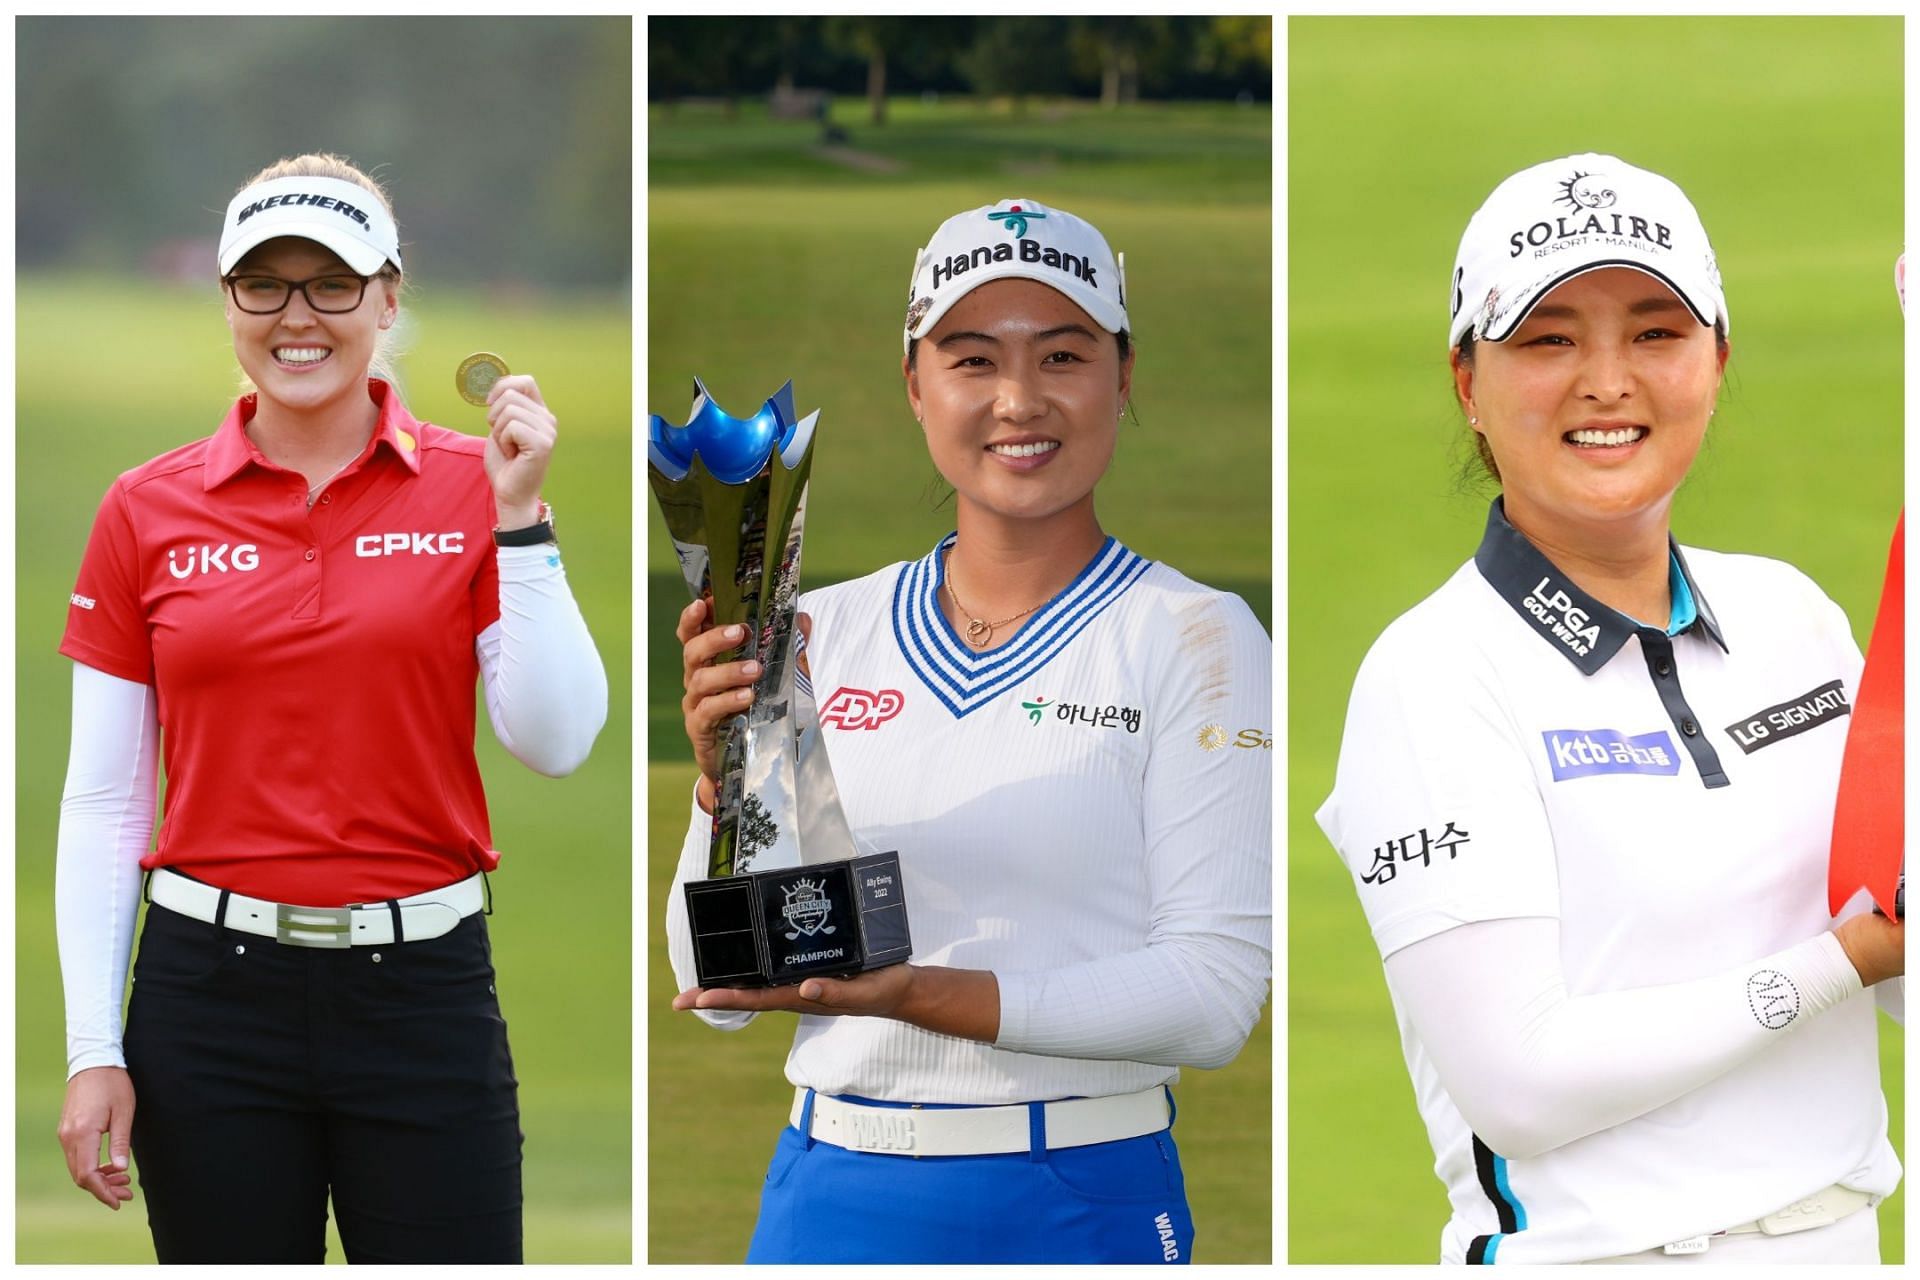 Many big LPGA stars are not in the squads of the 2023 Solheim Cup